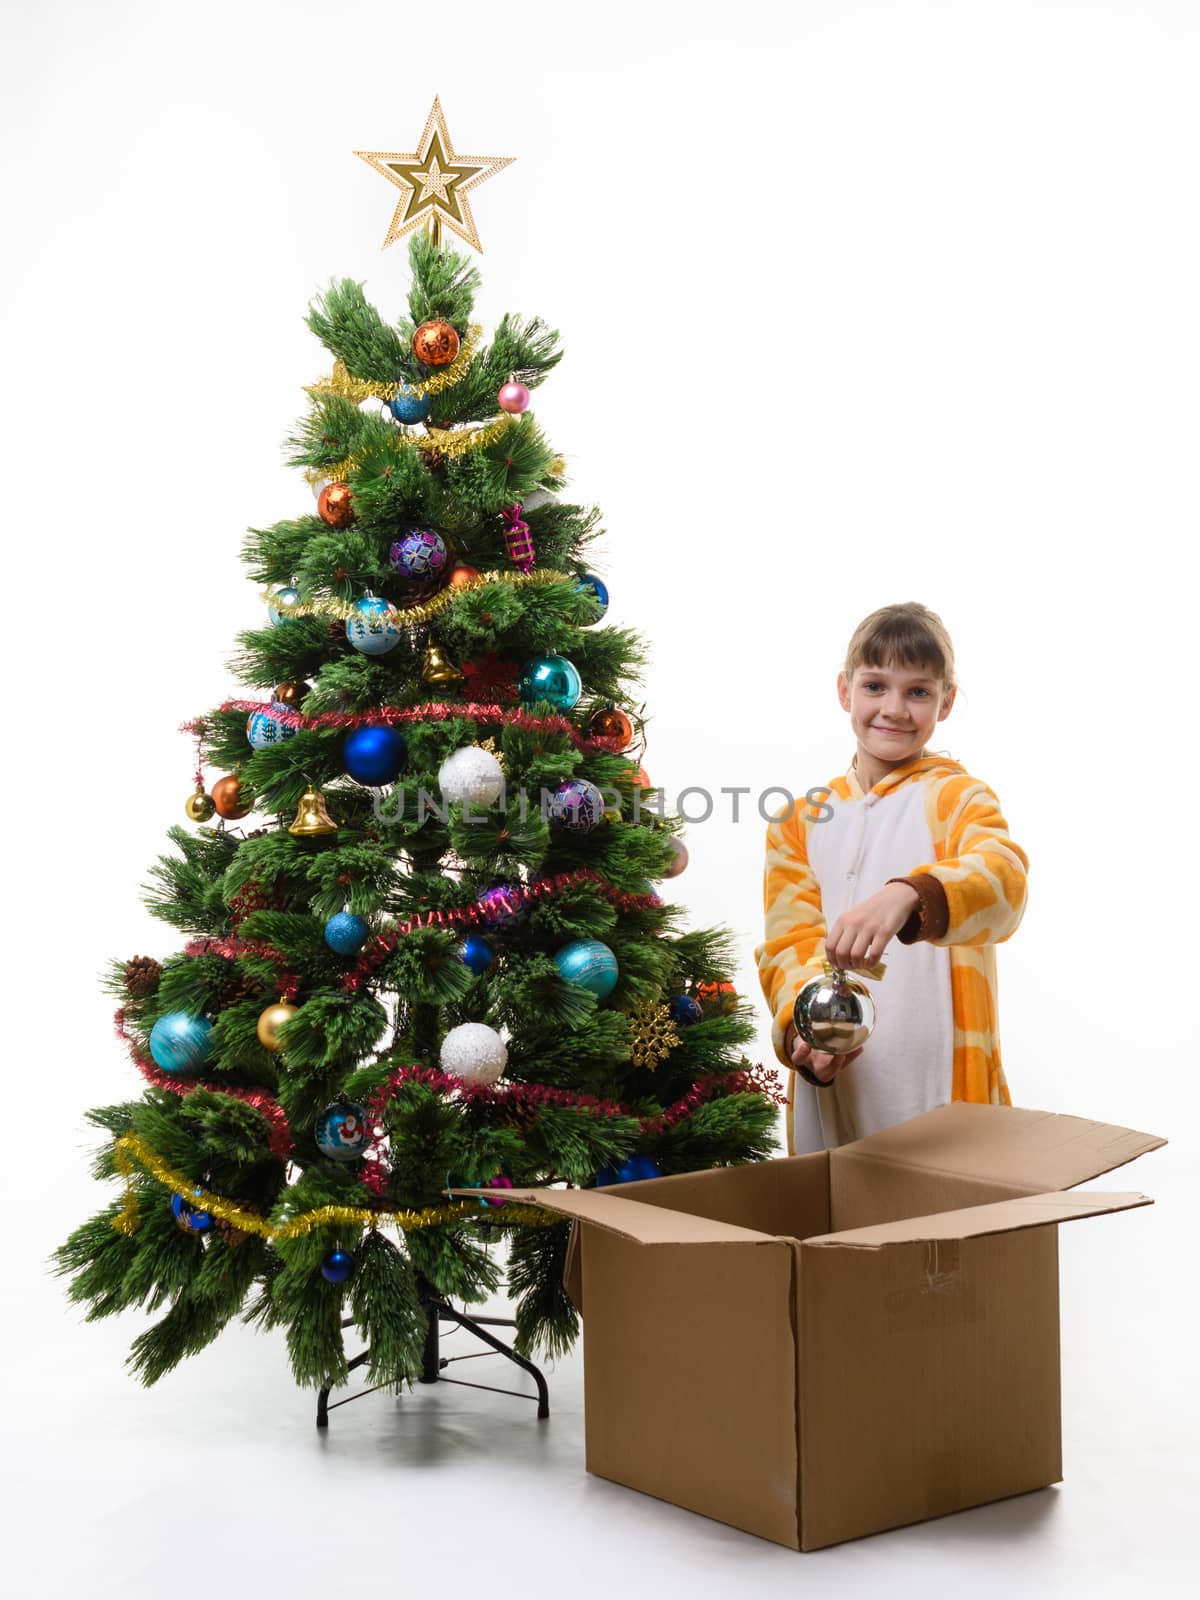 Girl removes Christmas balls from the Christmas tree and puts in a box by Madhourse